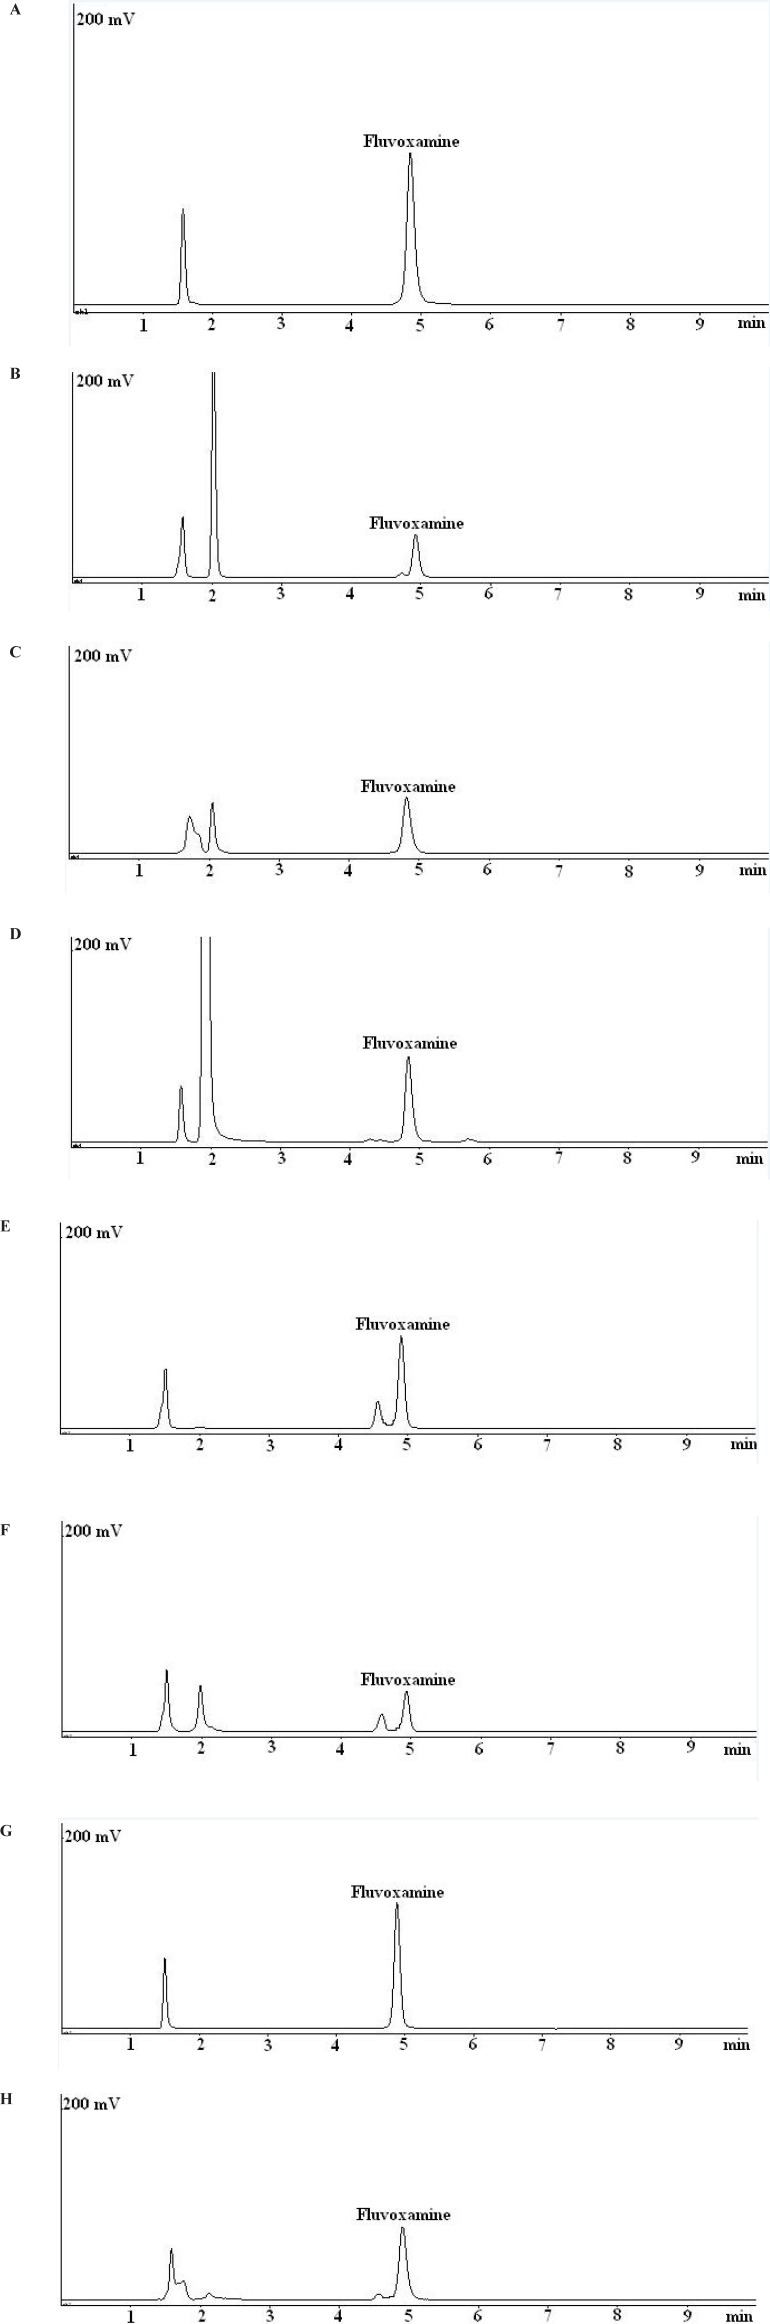 Typical chromatograms obtained from stability studies of fluvoxamine maleate. (a) fluvoxamine maleate standard solution (50 mg/mL); (b) fluvoxamine maleate solution in 0.5 M HCl after 10 min at 80 °C; (c) fluvoxamine maleate solution in 2 M NaOH after 40 min at at 80 °C; (d) fluvoxamine maleate solution in 10% H2O2 after 30 min at 80 °C; (e) fluvoxamine maleate bulk powder after 5 days exposure to UV light; (f) fluvoxamine maleate solution after 5 days exposure to UV light; (g) fluvoxamine maleate solution after 5 days exposure to visible light; (h) fluvoxamine maleate solution after 5 days exposure to heat